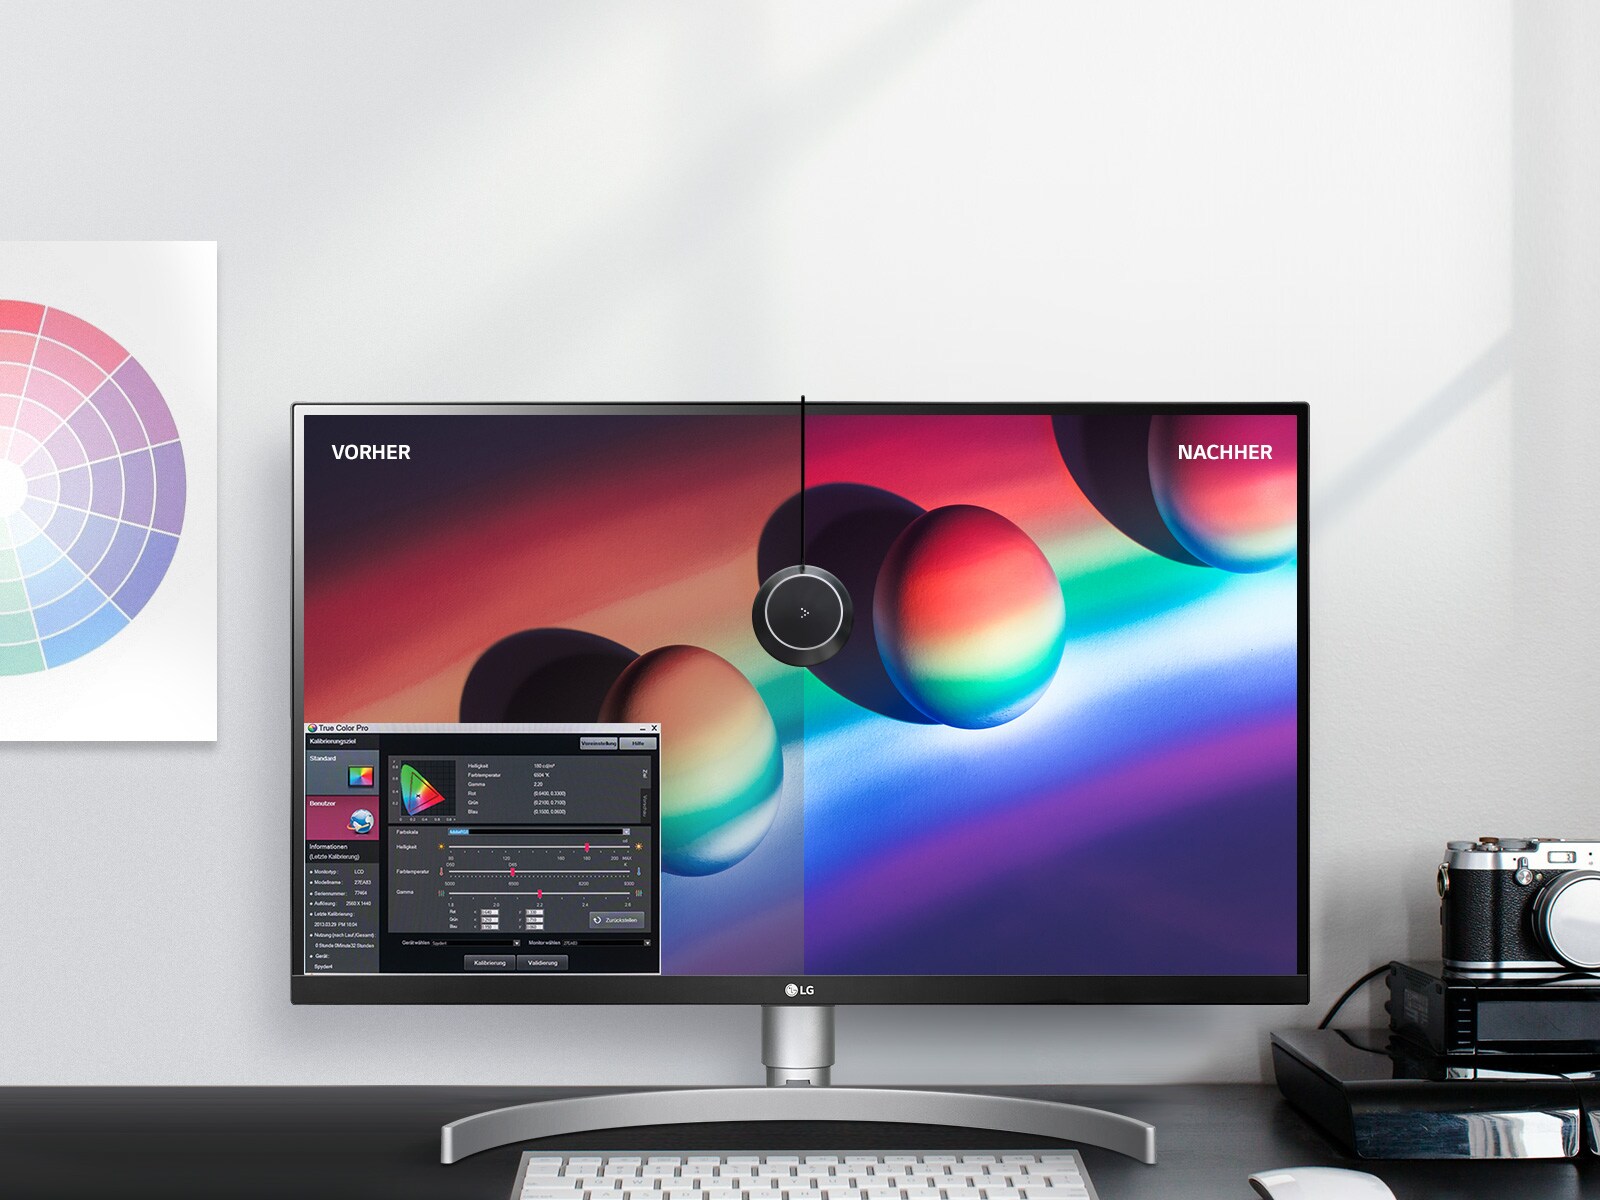 LG's great as an option for a monitor for coding